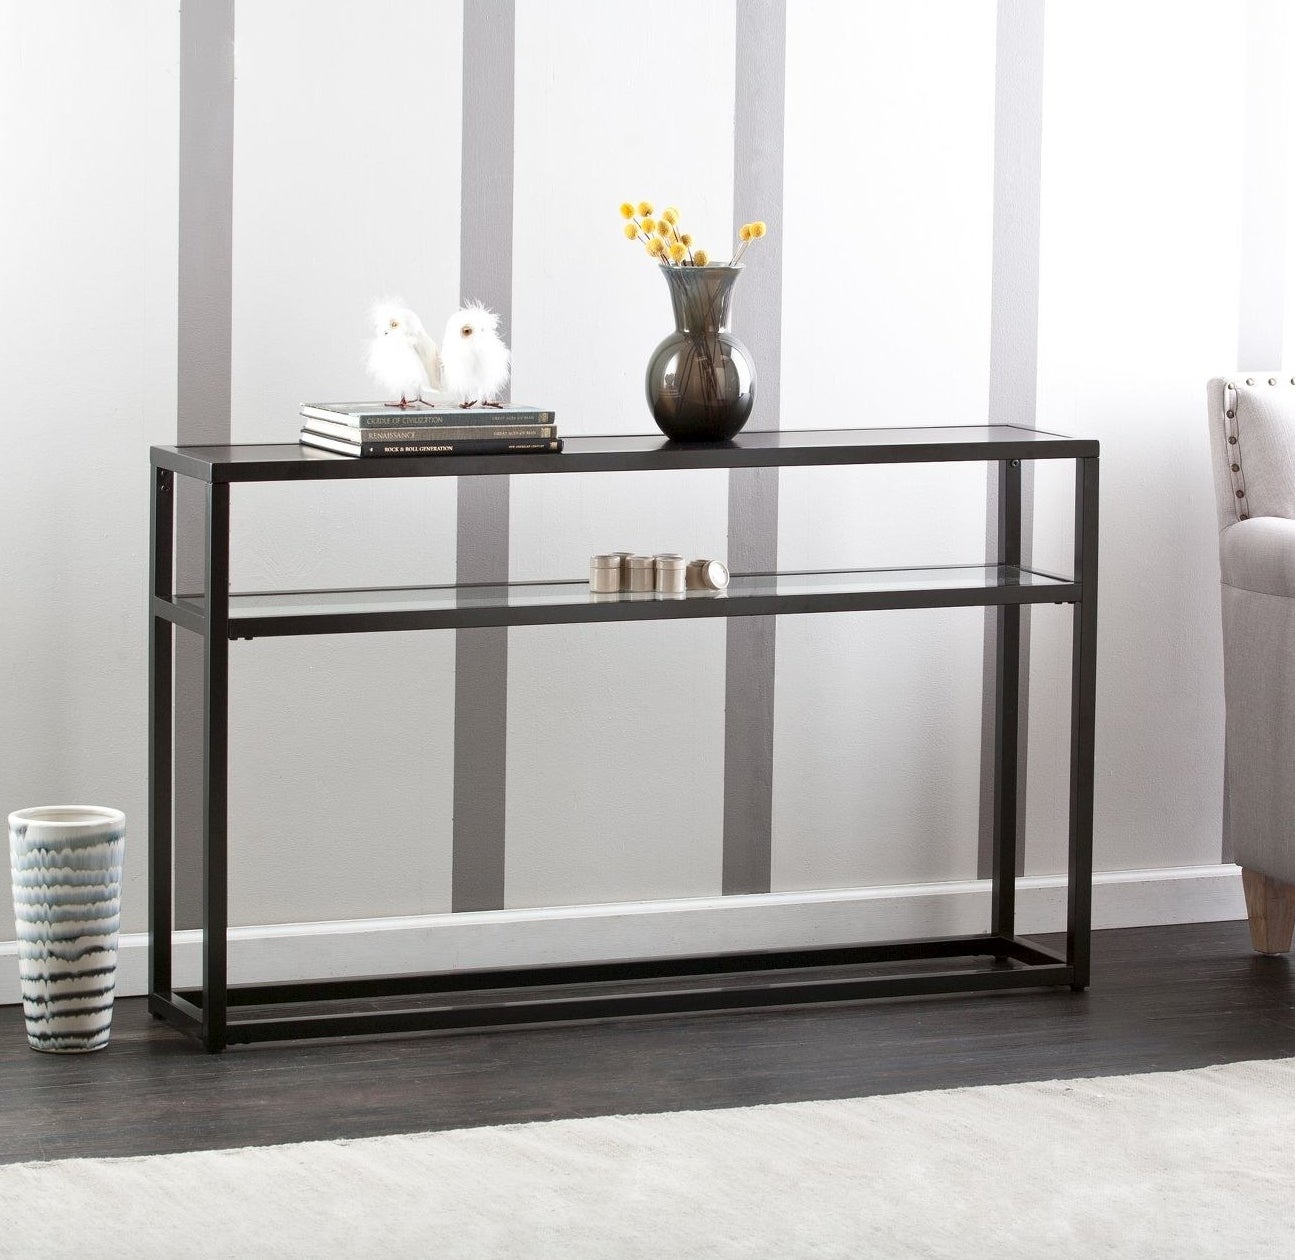 A black console table with a glass top